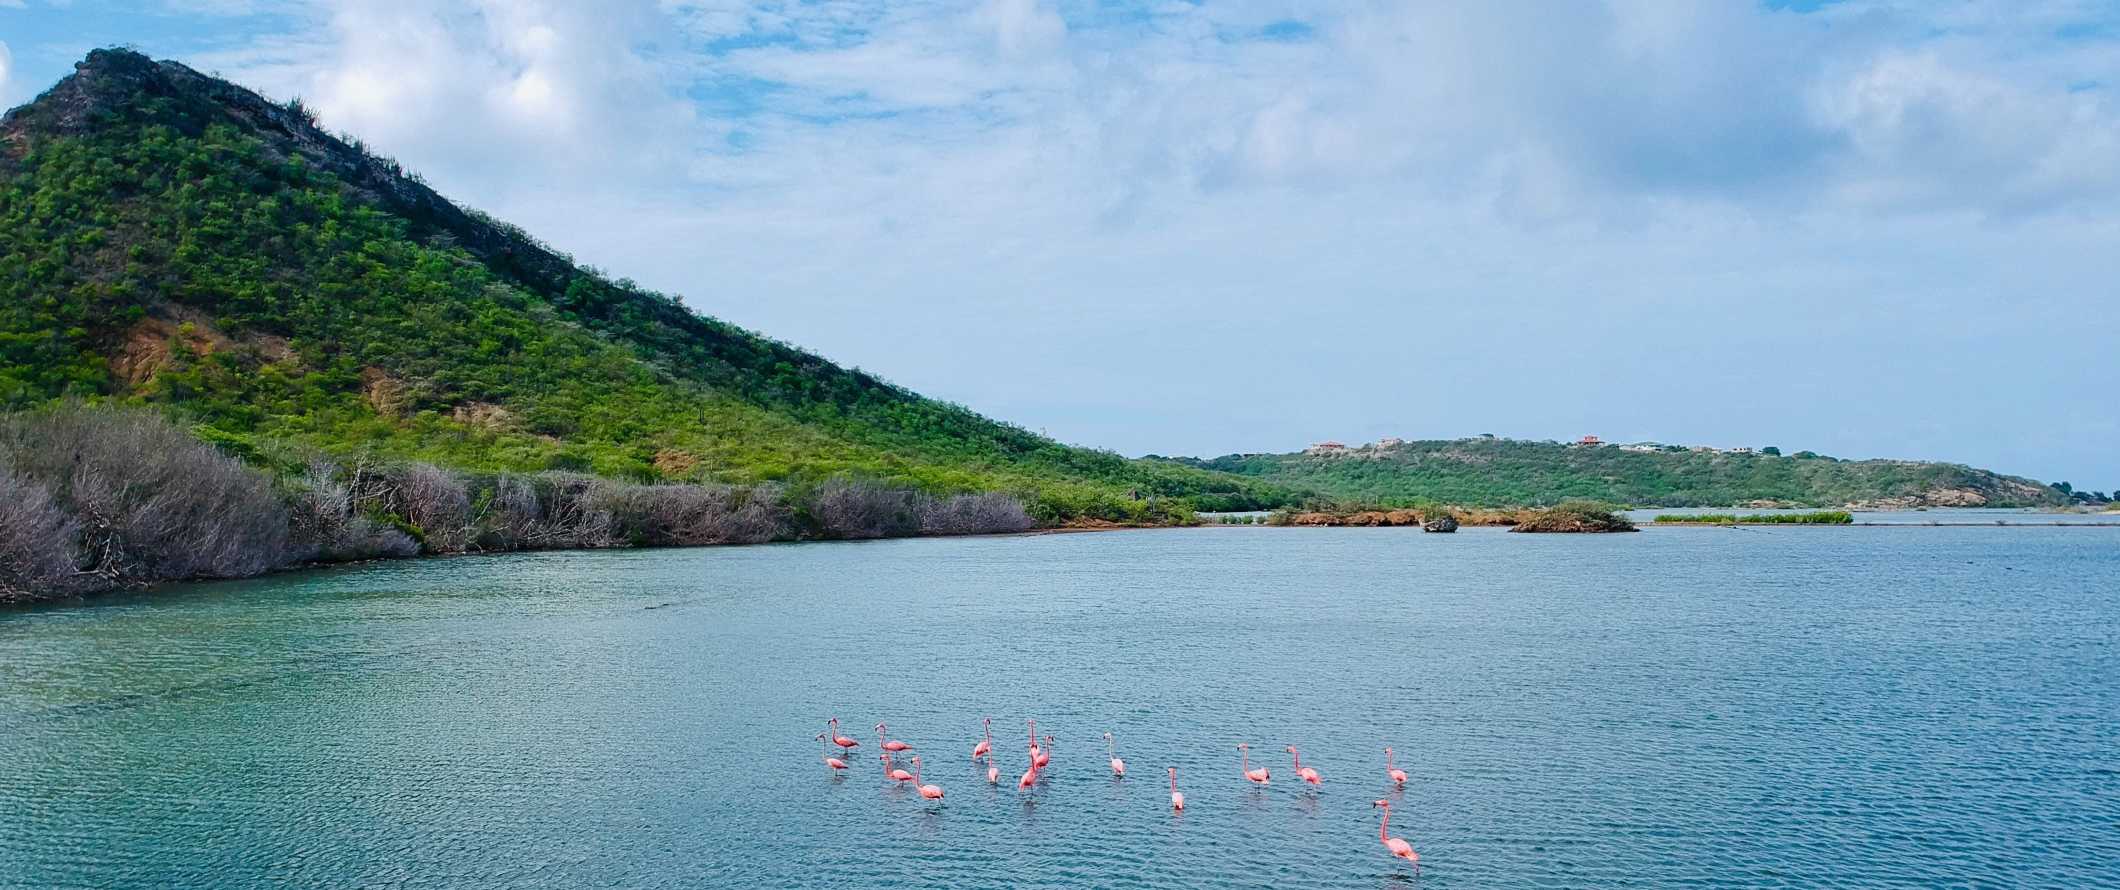 A flock of flamingos in the Caribbean Ocean off the store of a tropical island covered in lush greenery